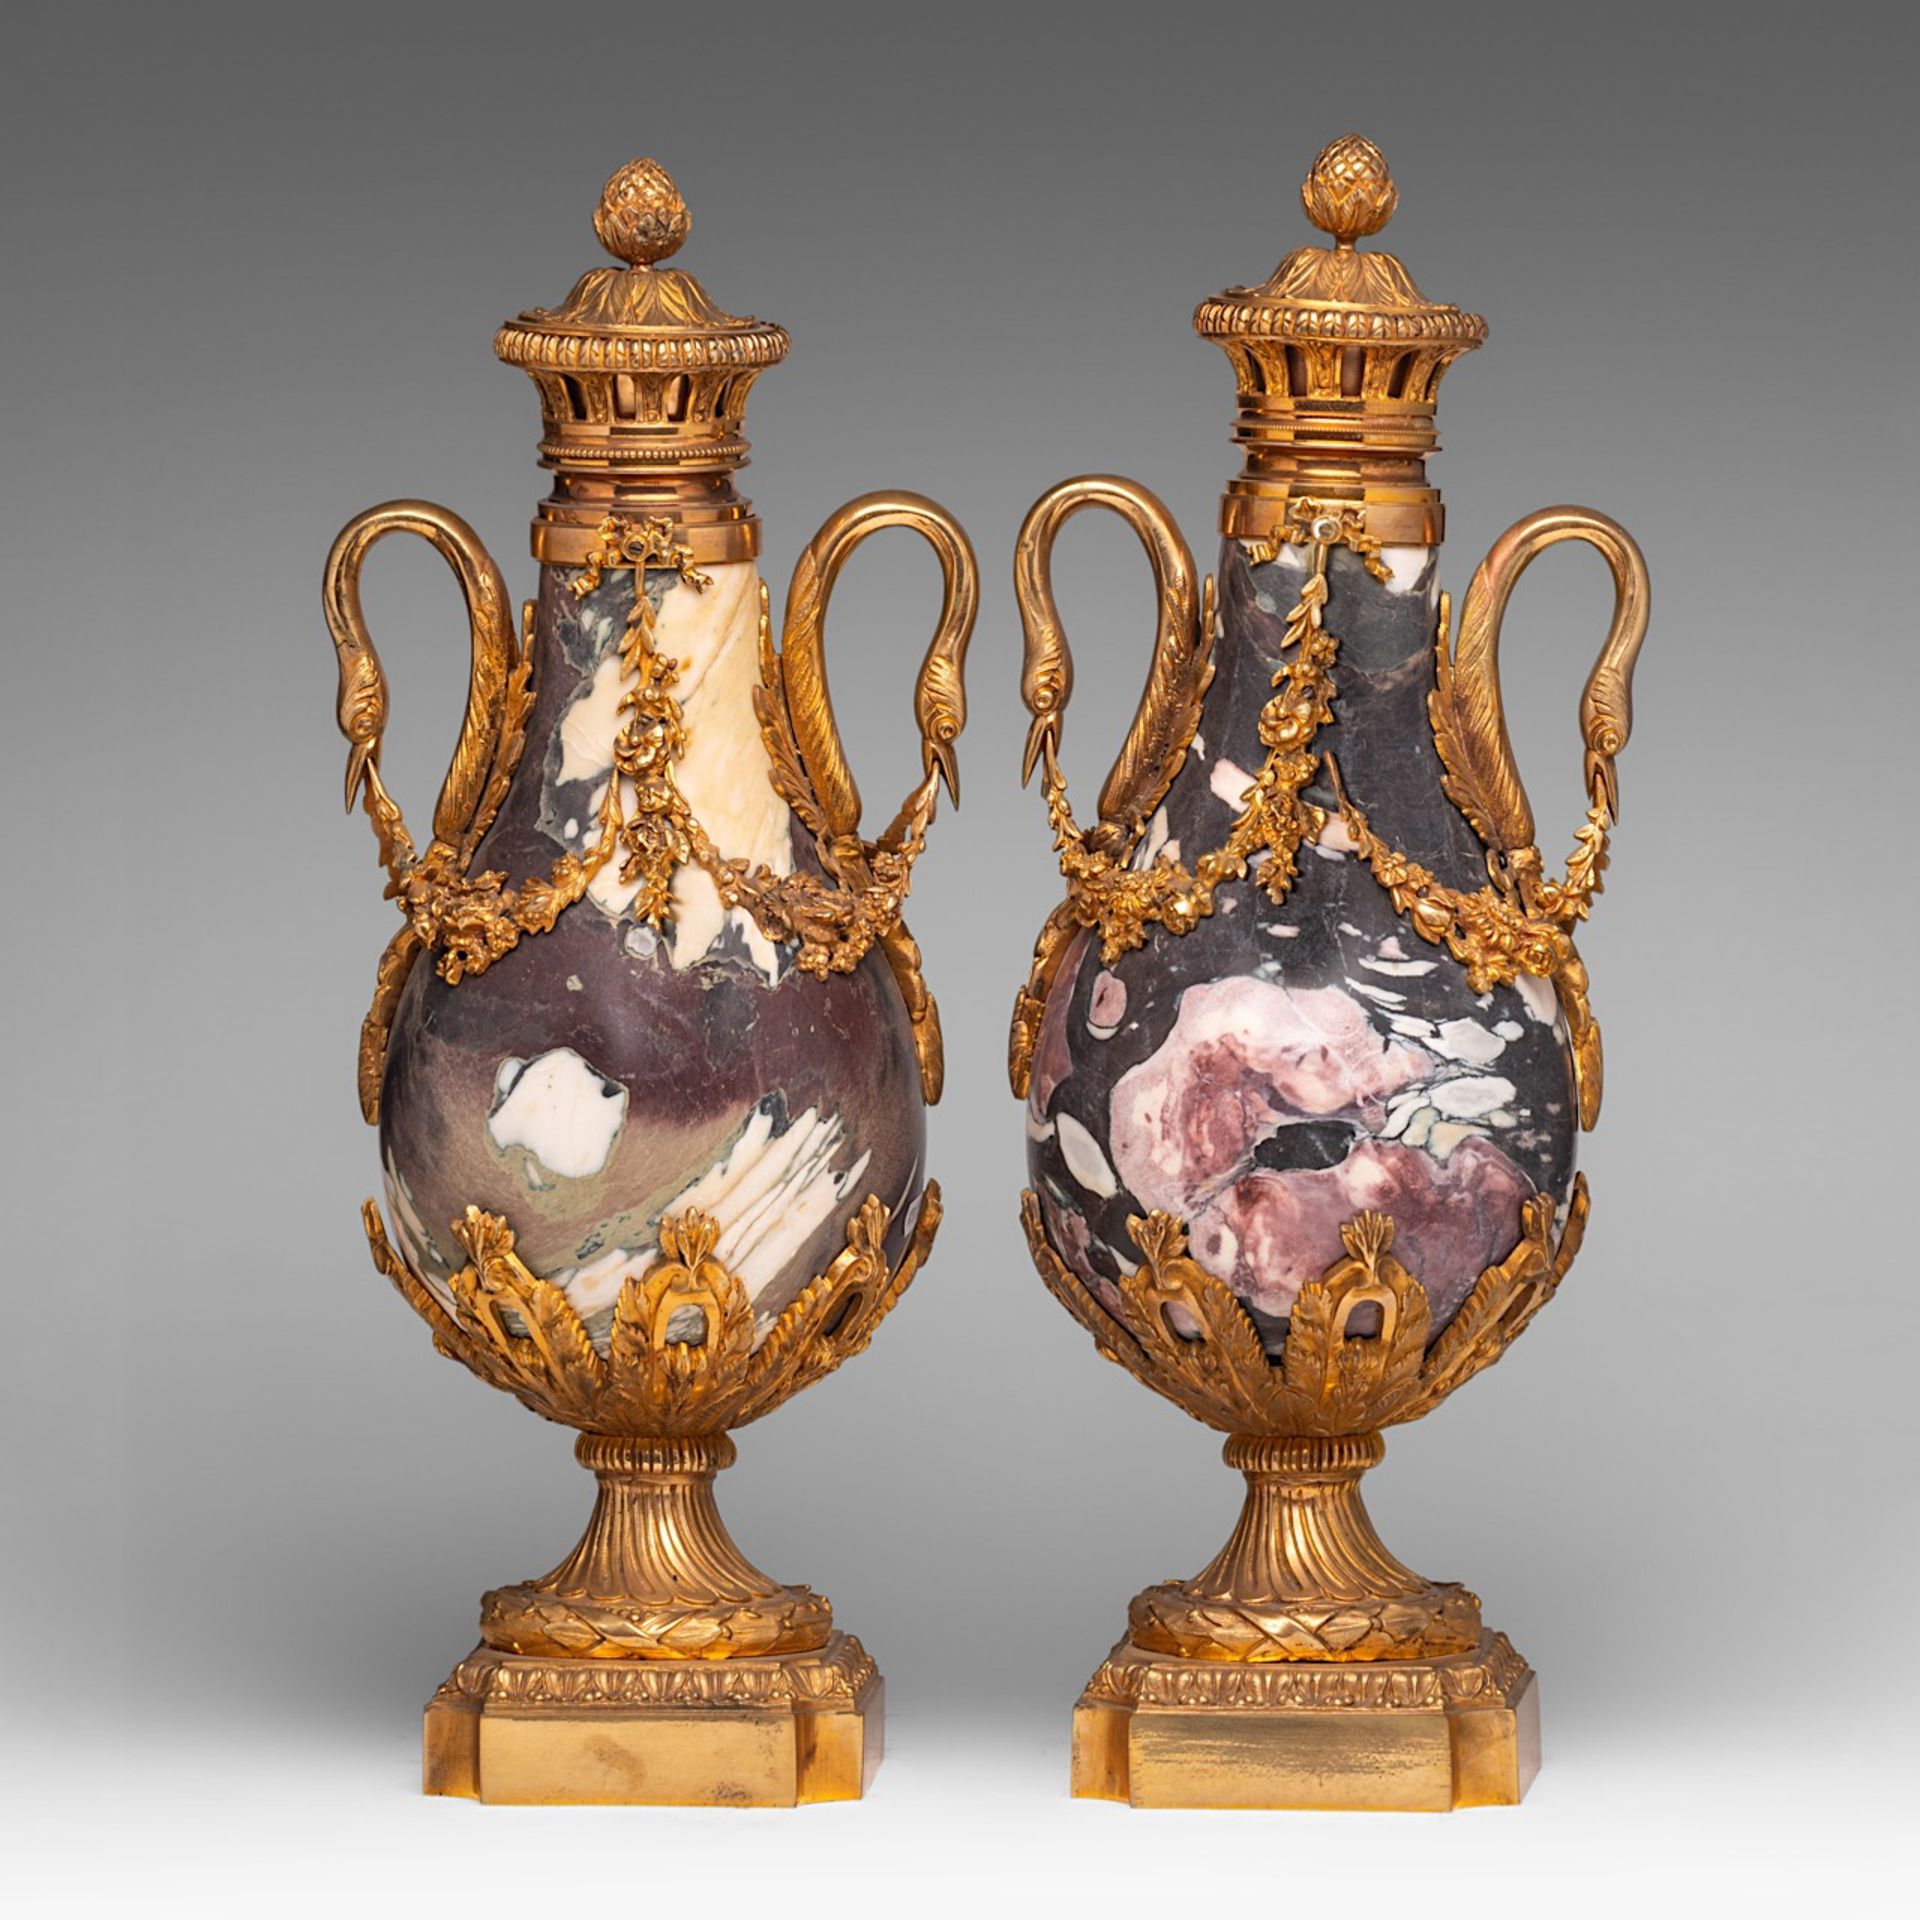 A pair of Neoclassical marble cassolettes with gilt bronze mounts, H 55 cm